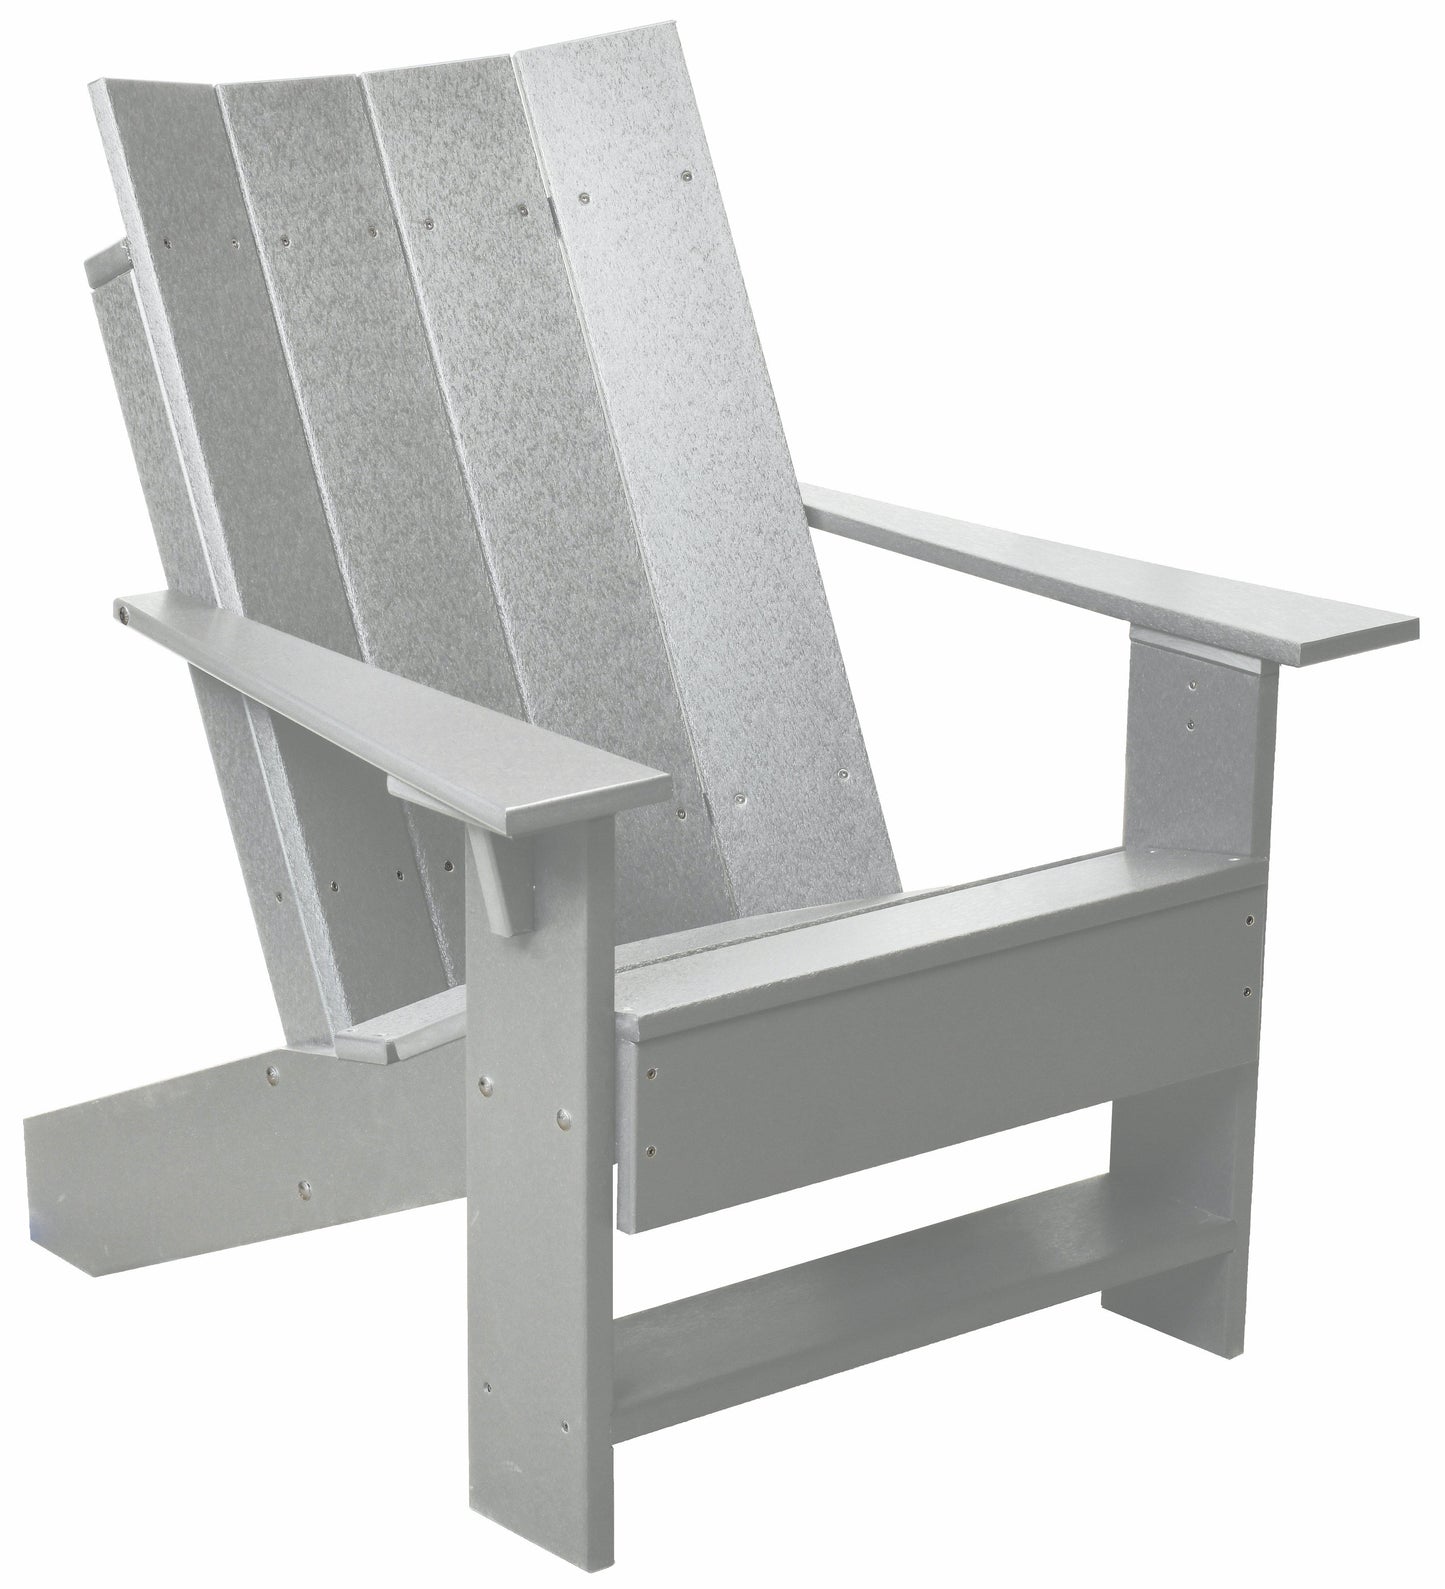 Wildridge Outdoor Recycled Plastic LCC-314 Contemporary Adirondack Chair (QUICK SHIP) - LEAD TIME TO SHIP 3 TO 4 BUSINESS DAYS